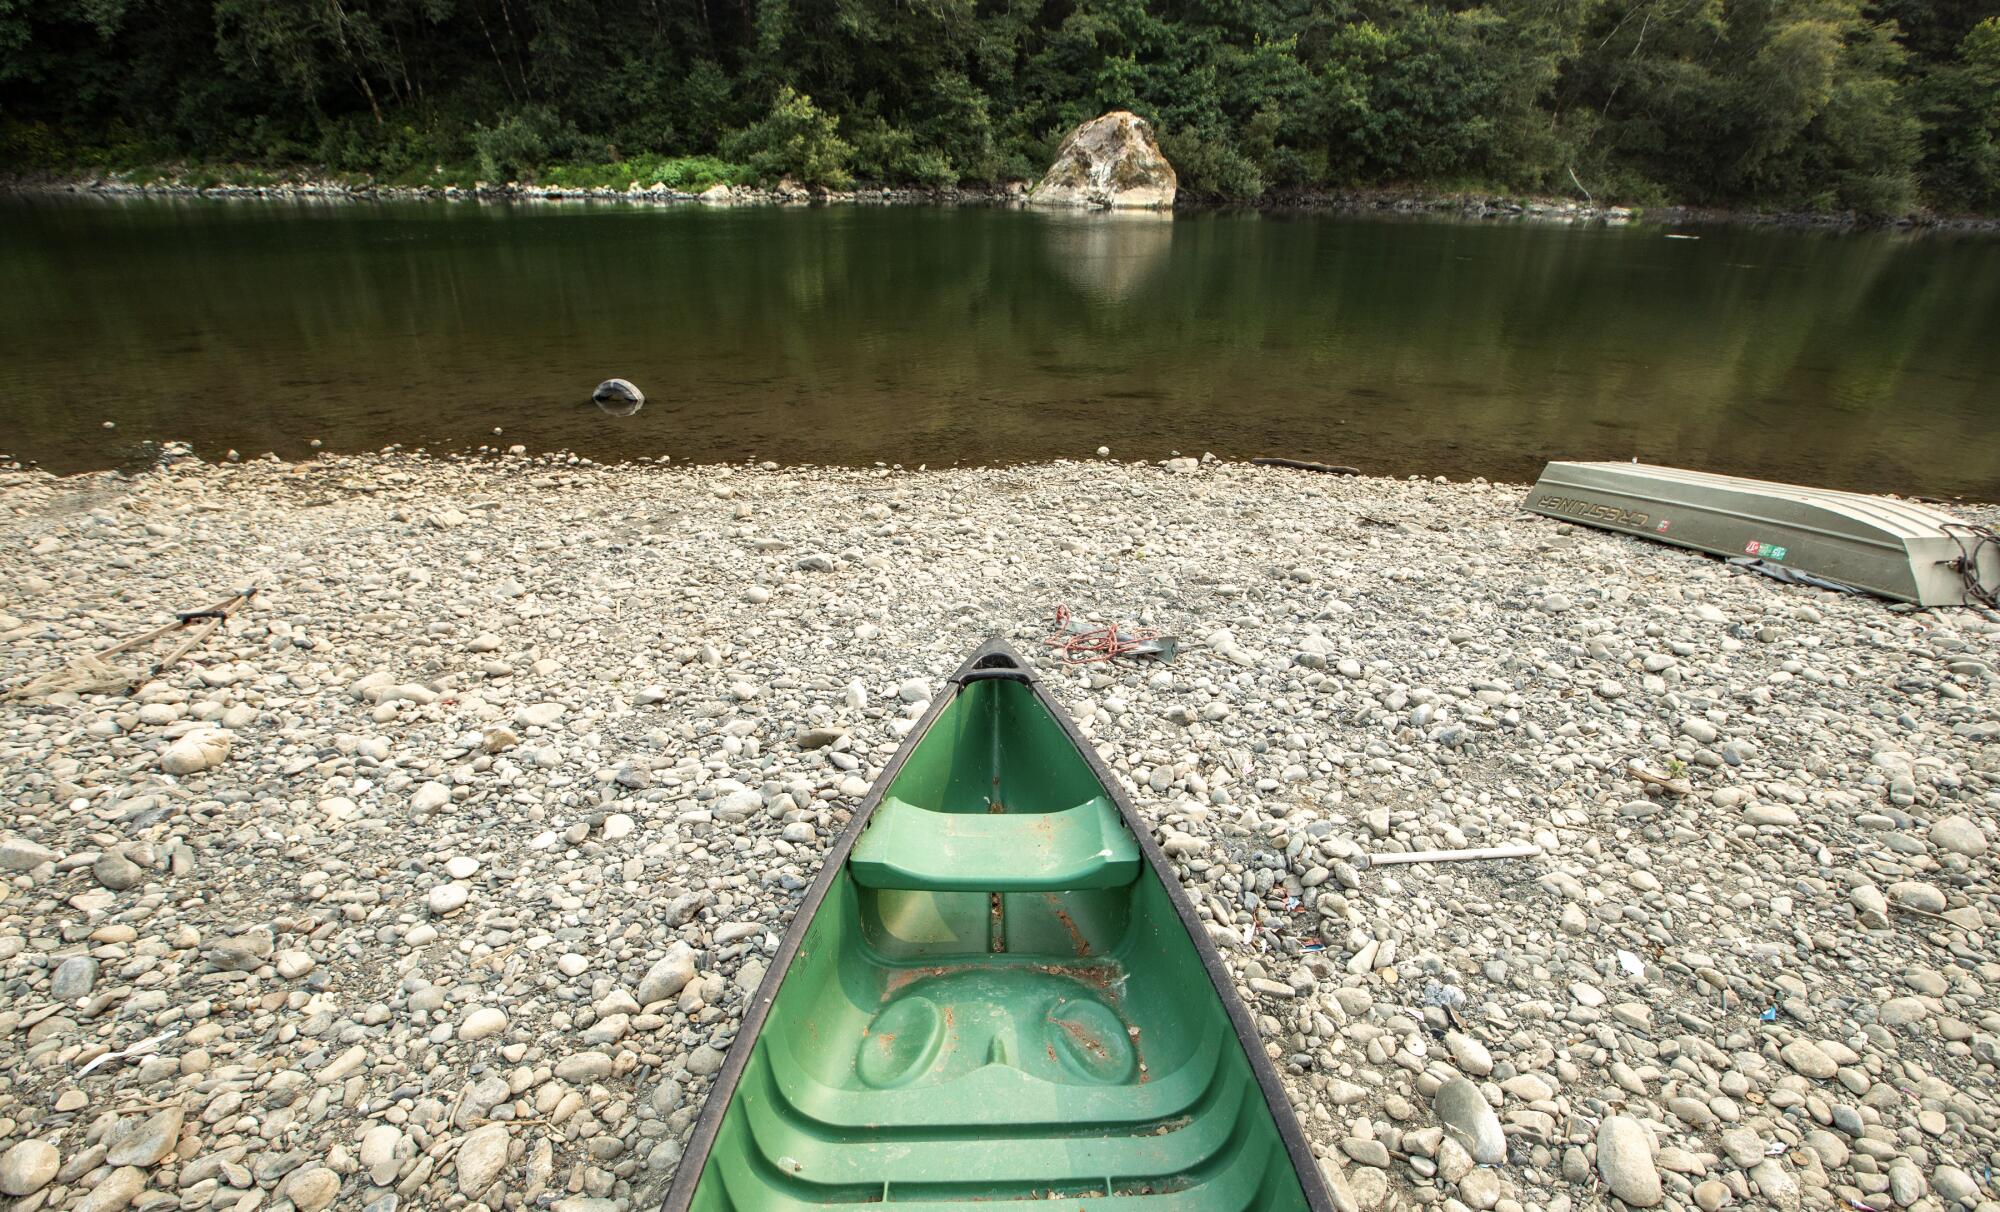 A canoe rests on on a river bank.